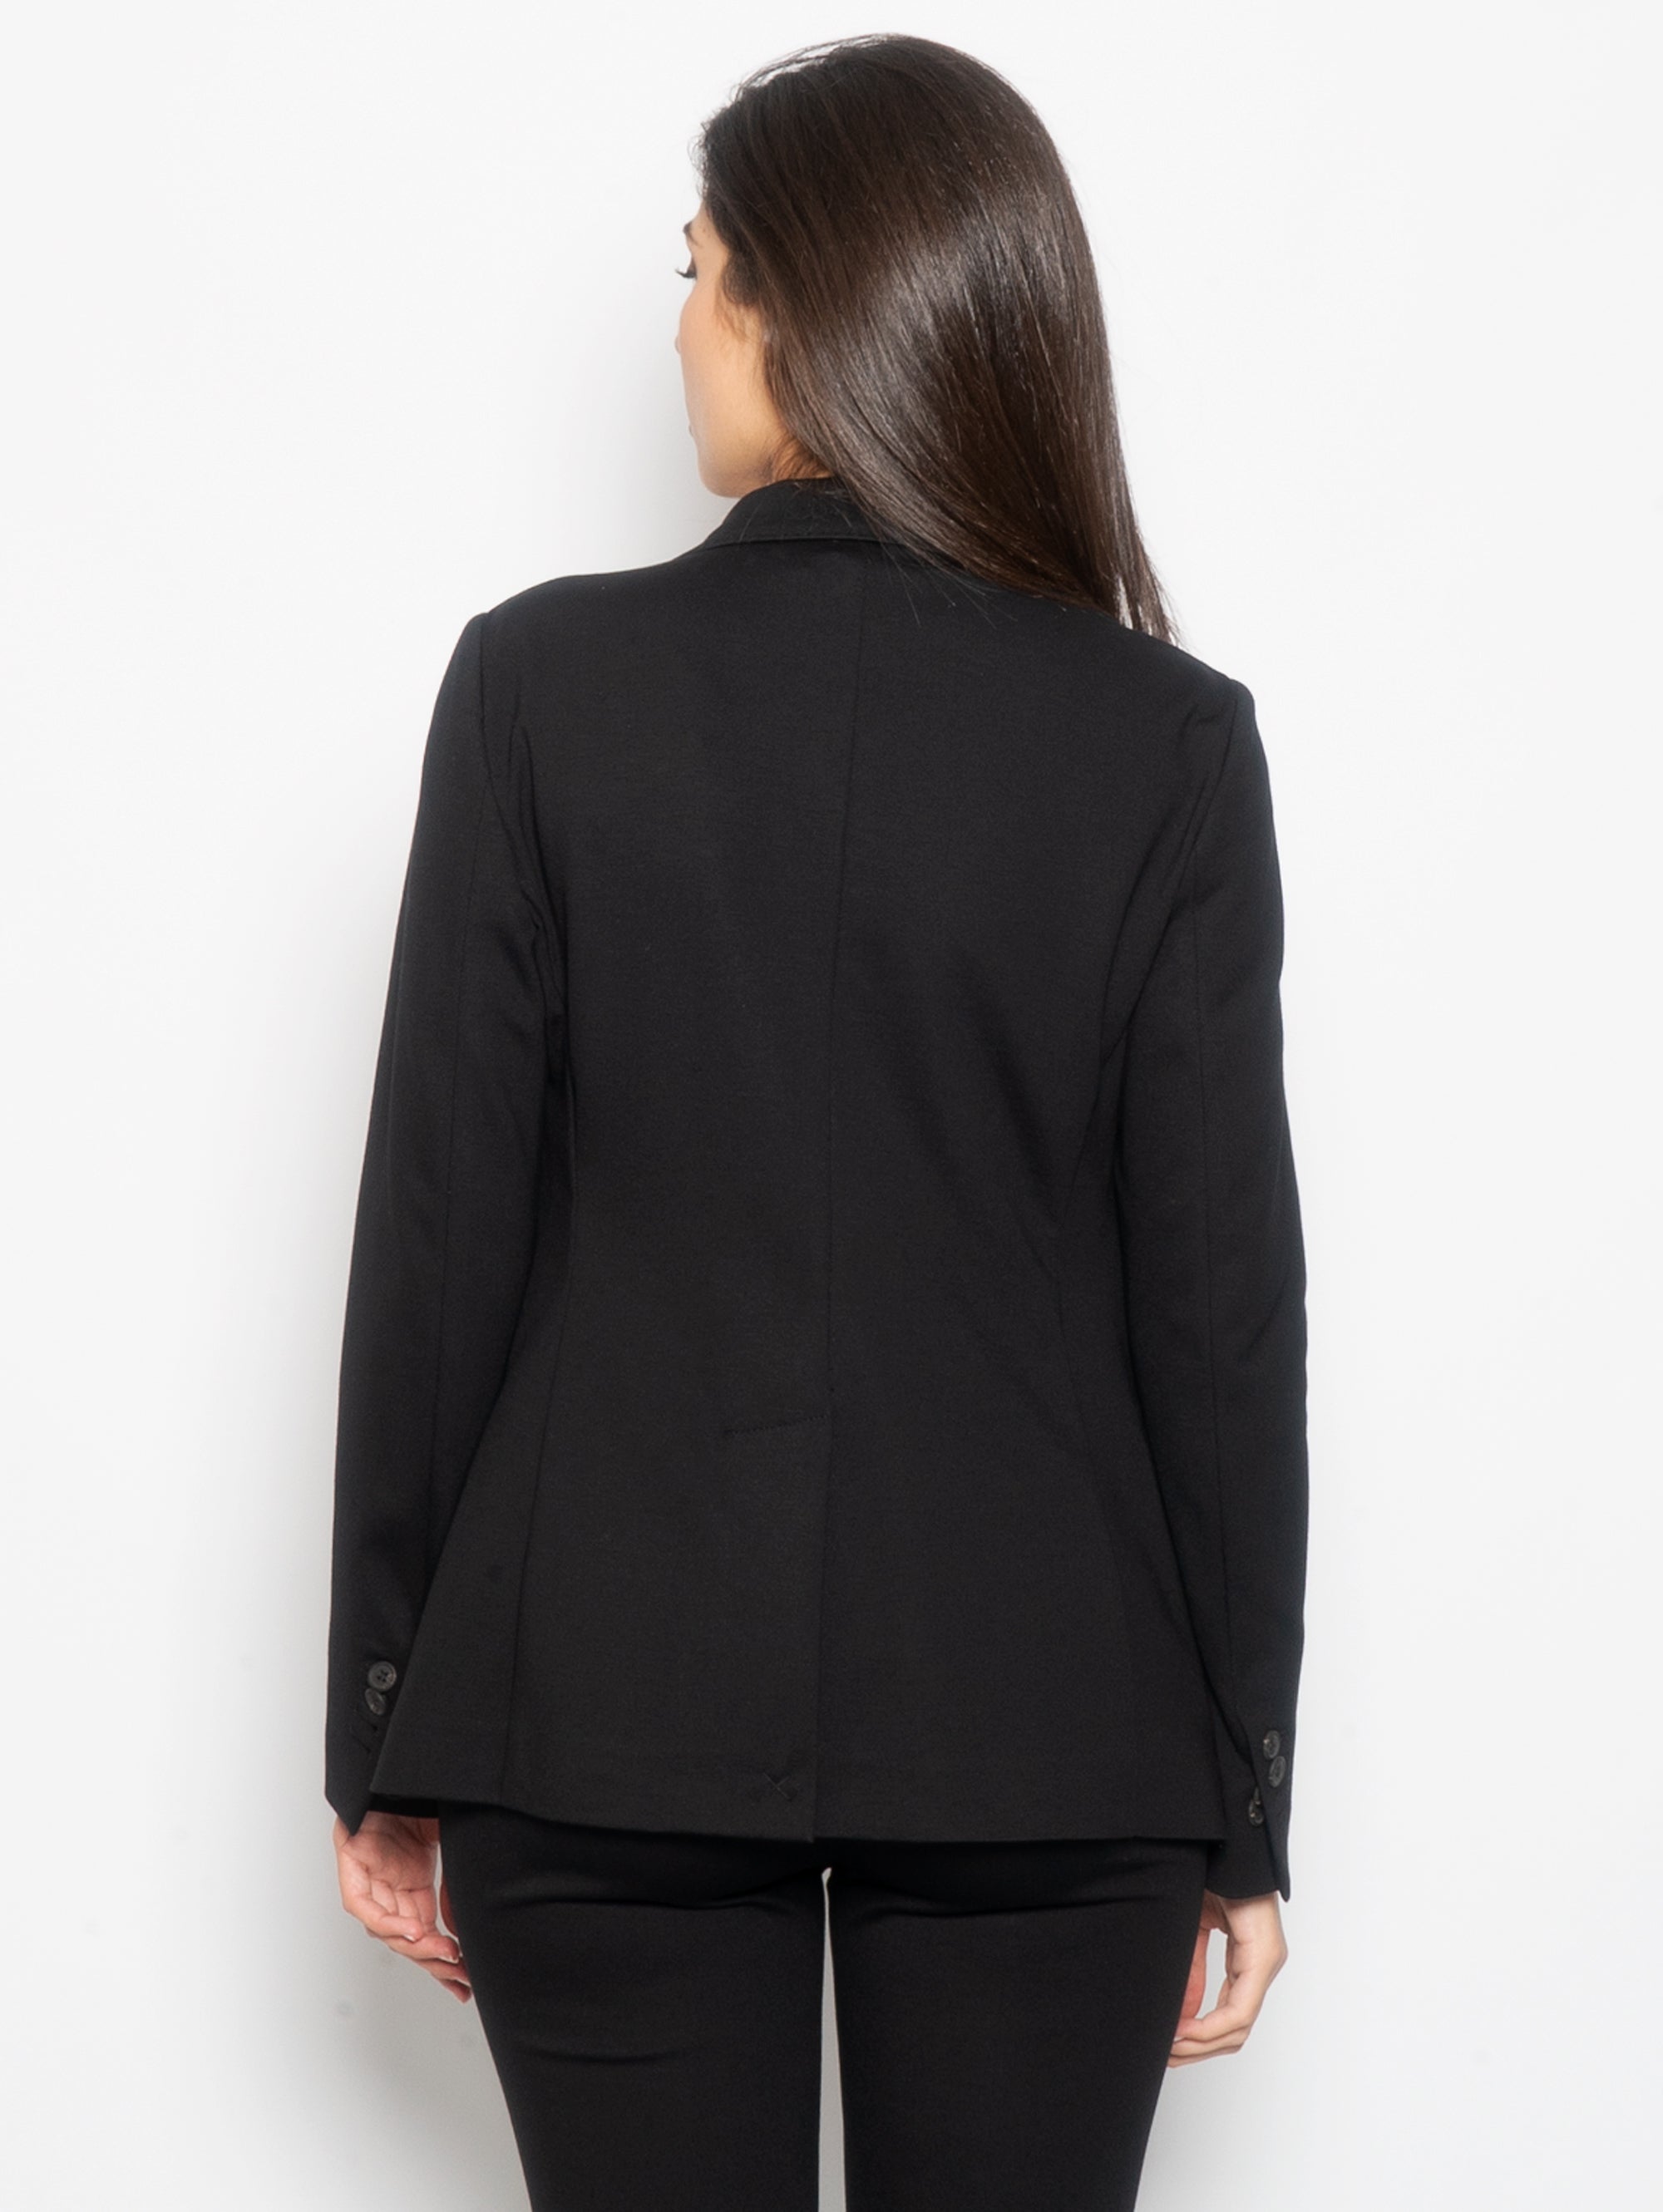 Single-breasted jacket in black fabric stitch